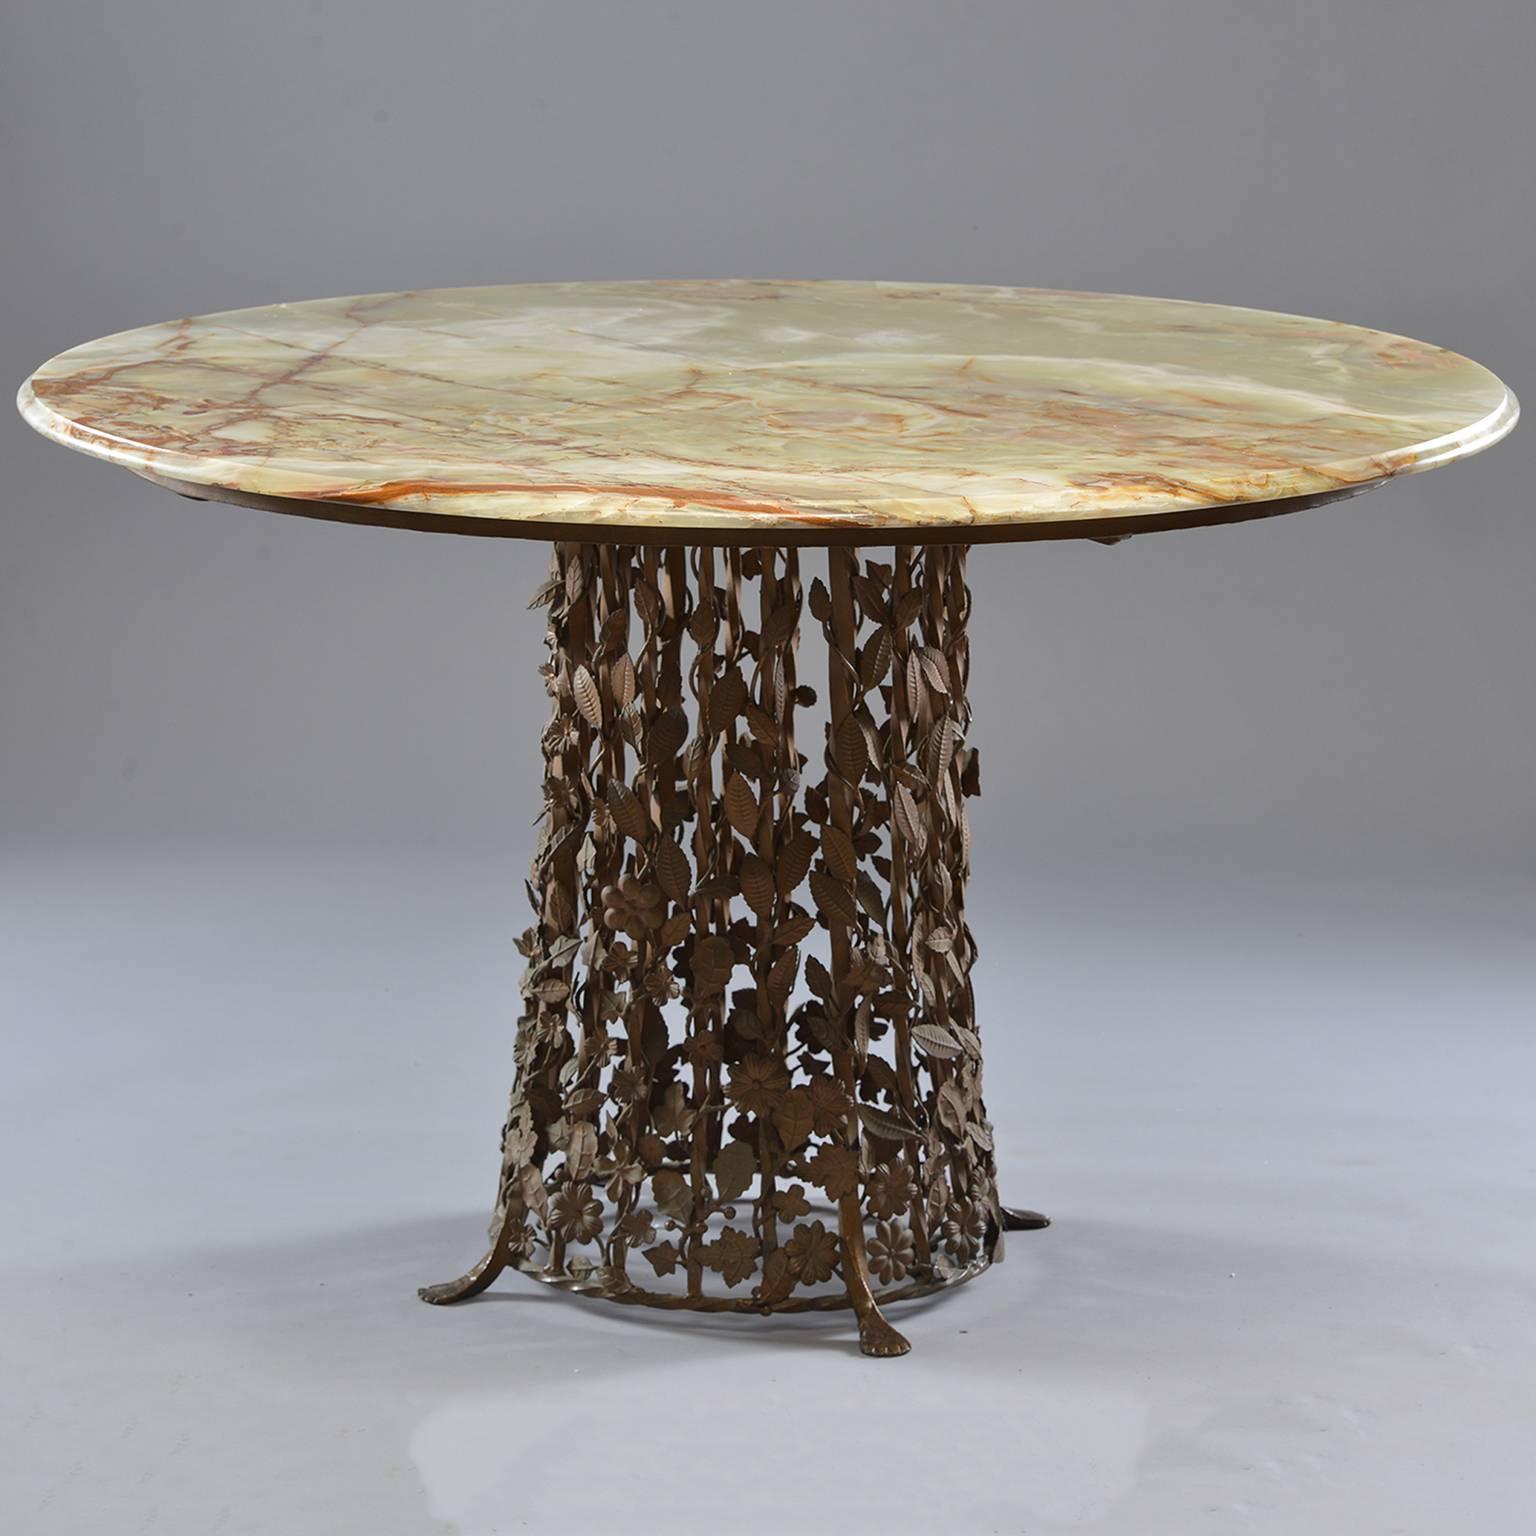 Italian round centre table has a brass base of elaborately rendered vines with leaves and flowers, circa 1960. Round onyx table top features contrasting streaks of amber and cream.